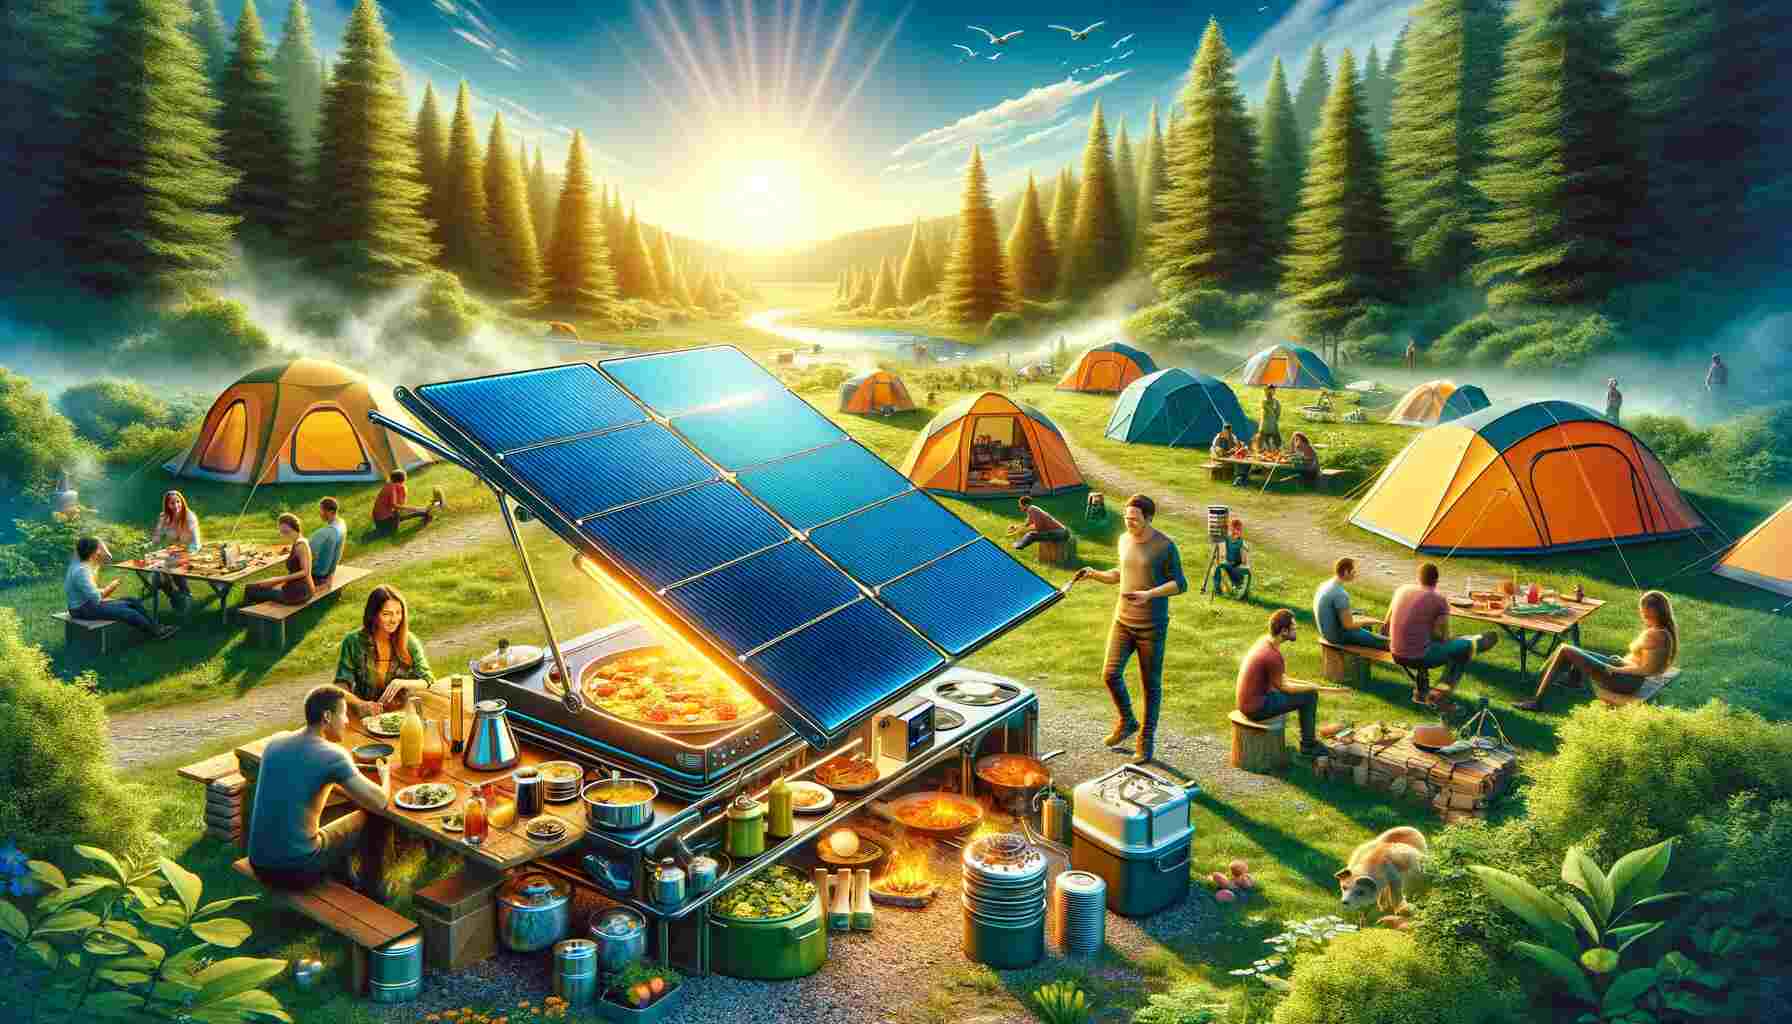 Here is the featured image showcasing solar cooking while camping in 2024. It vividly captures the scene with campers gathered around a modern solar cooker, set against a scenic camping site.